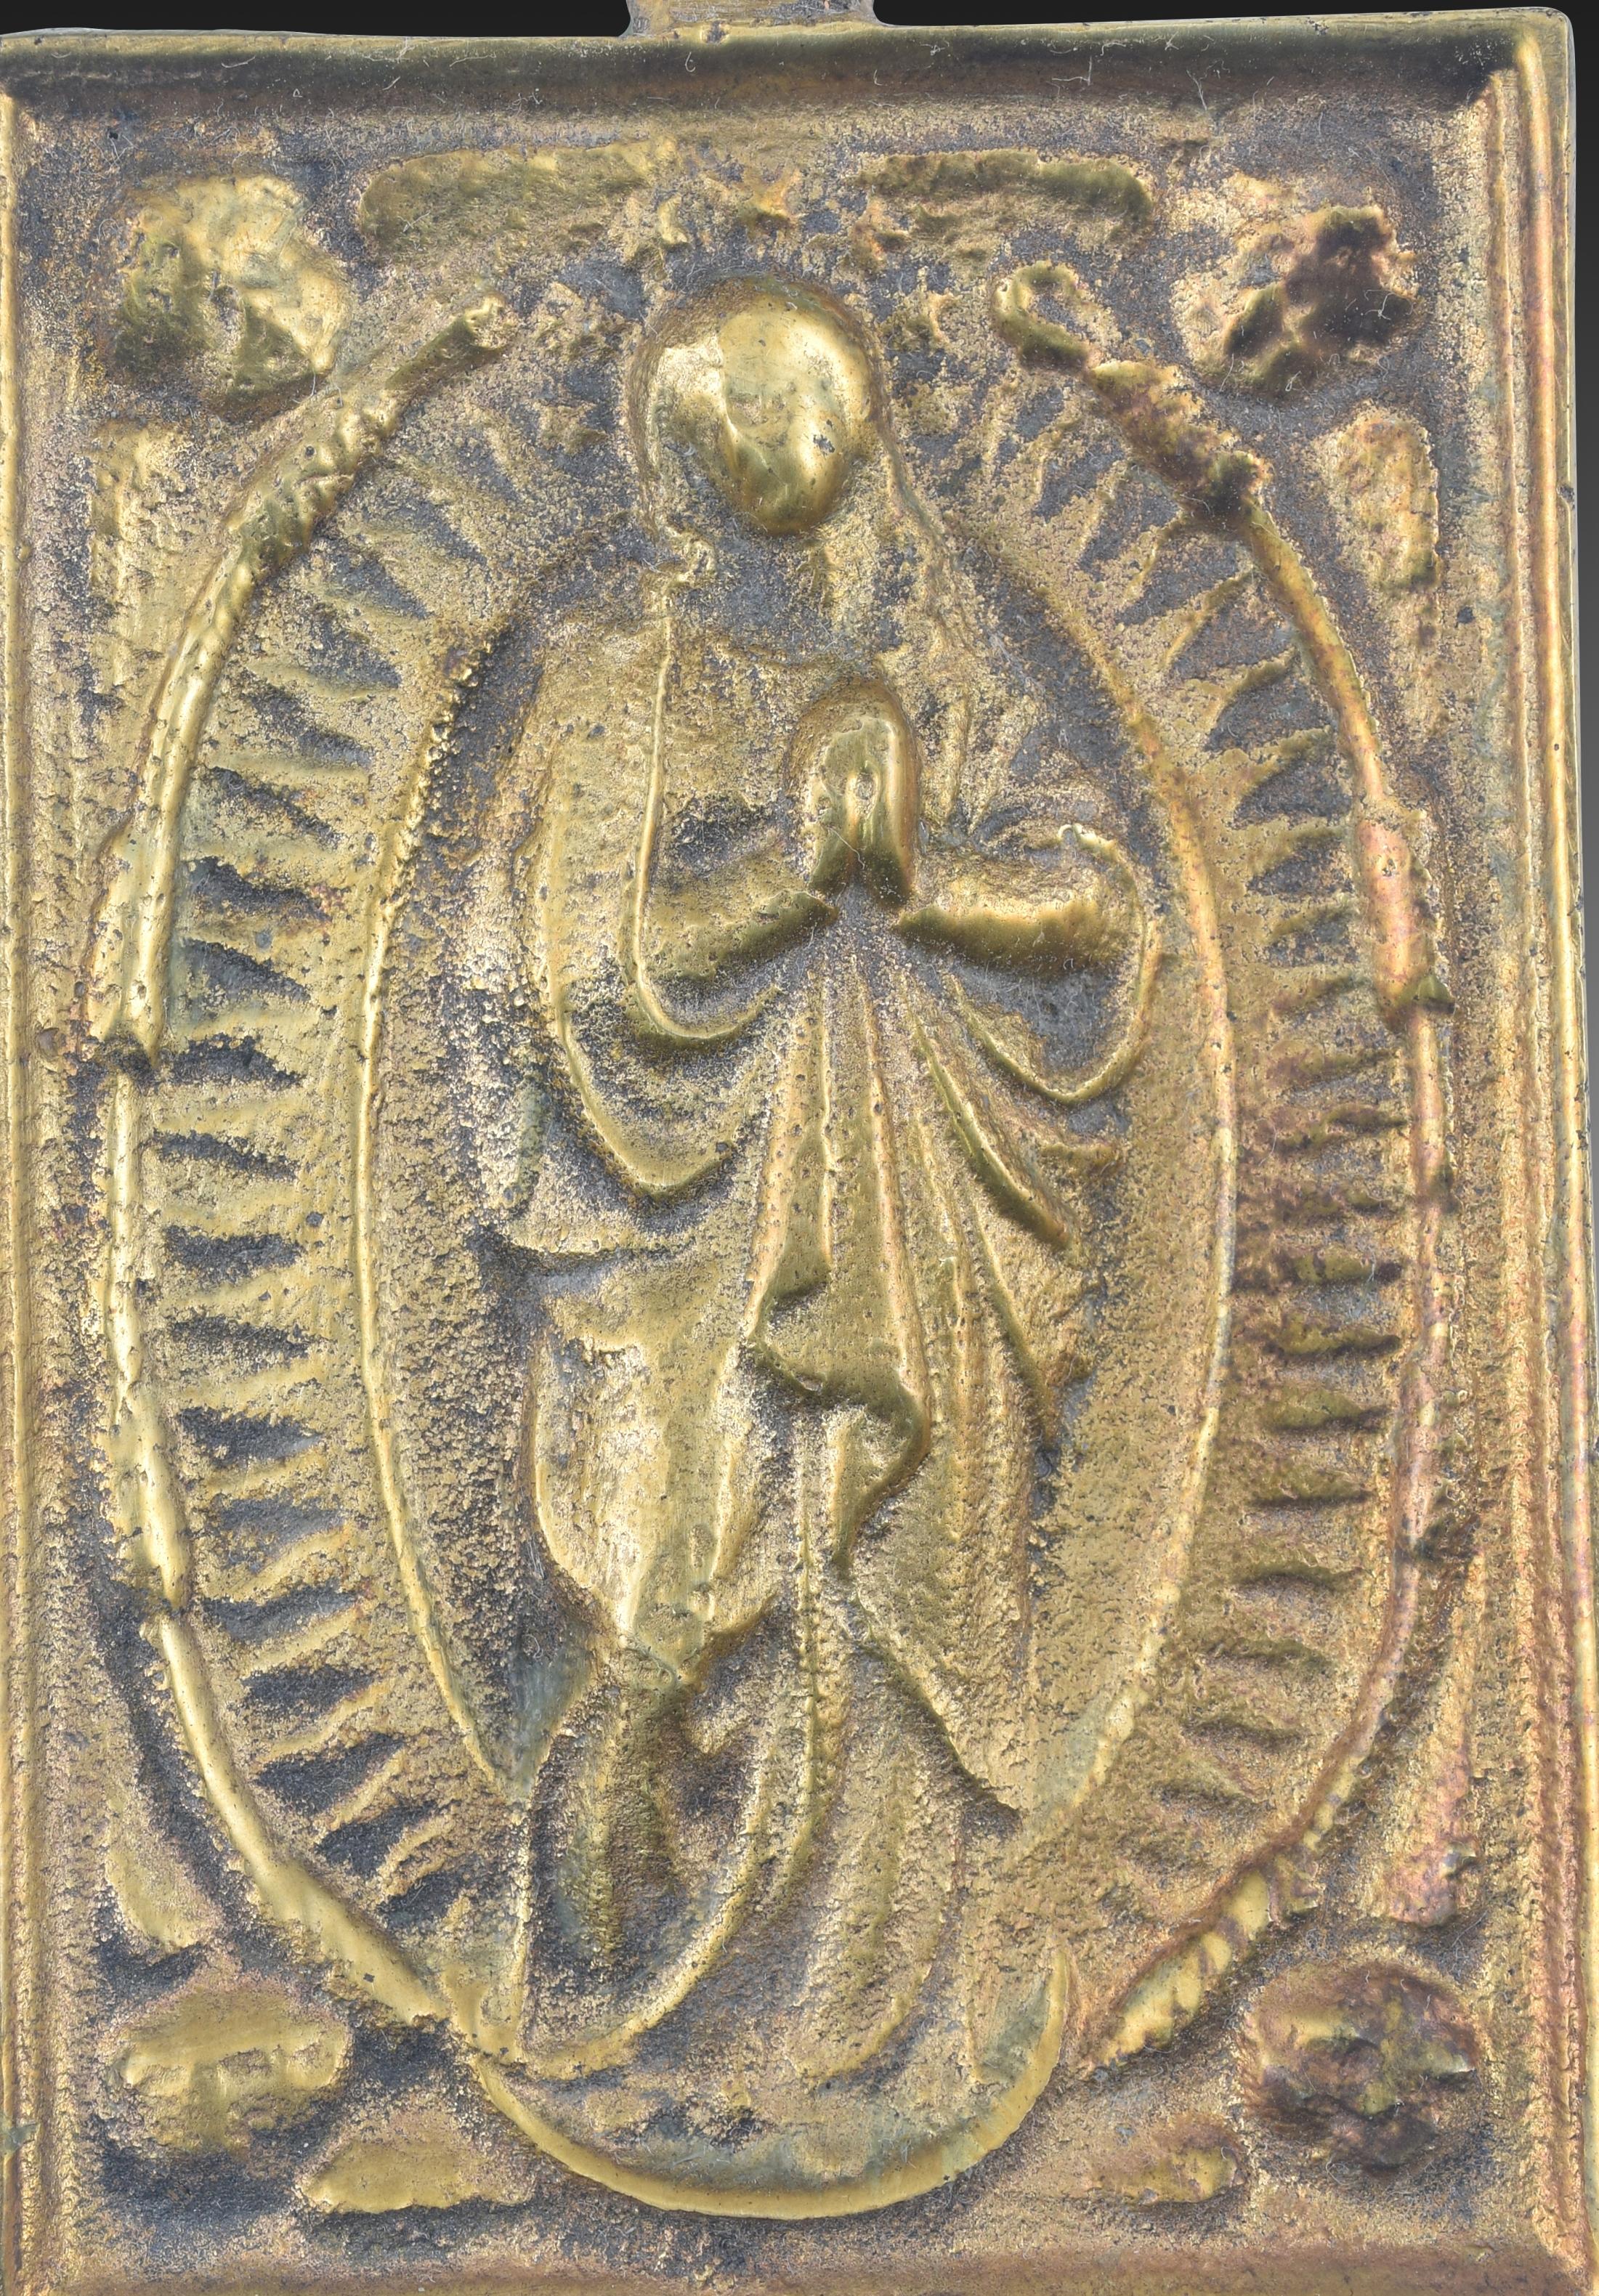 Neoclassical Revival Devotional plaque, Immaculate Conception. Bronze. Spanish school, 19th century.  For Sale